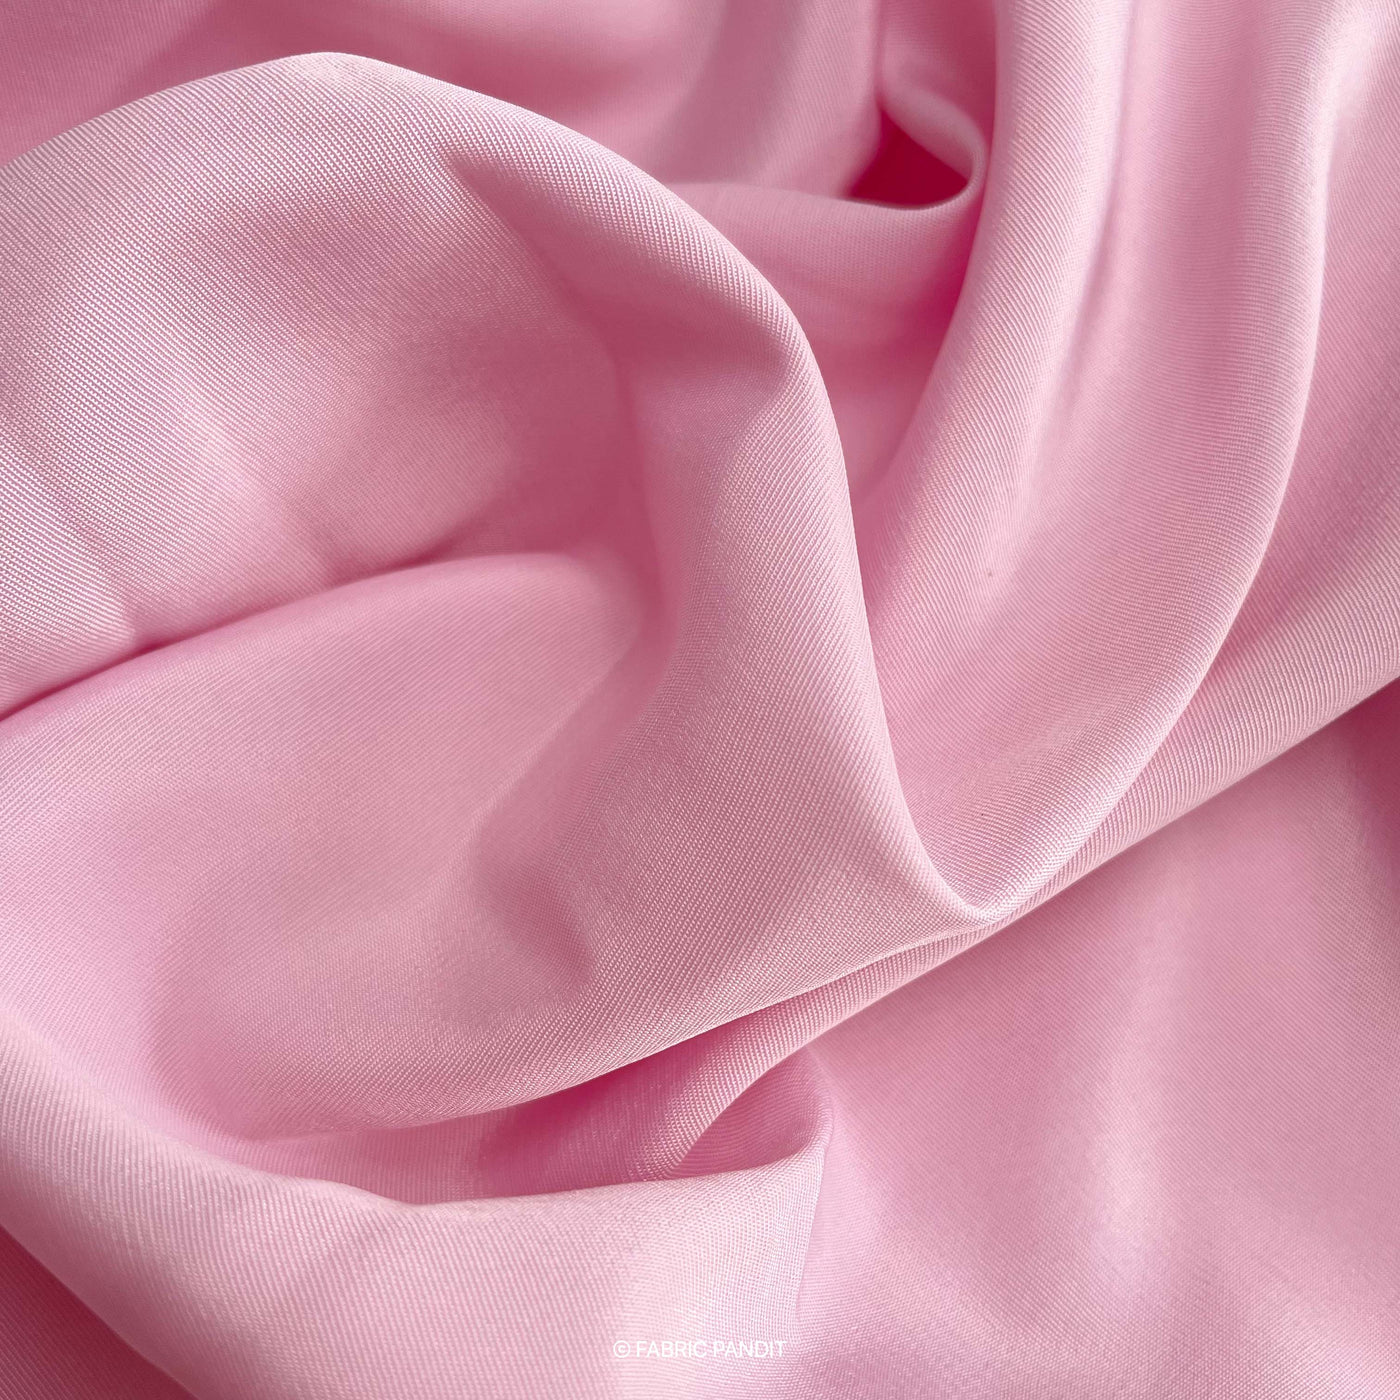 Fabric Pandit Cut Piece (CUT PIECE) Carnation Pink Premium French Crepe Fabric (Width 44 inches)